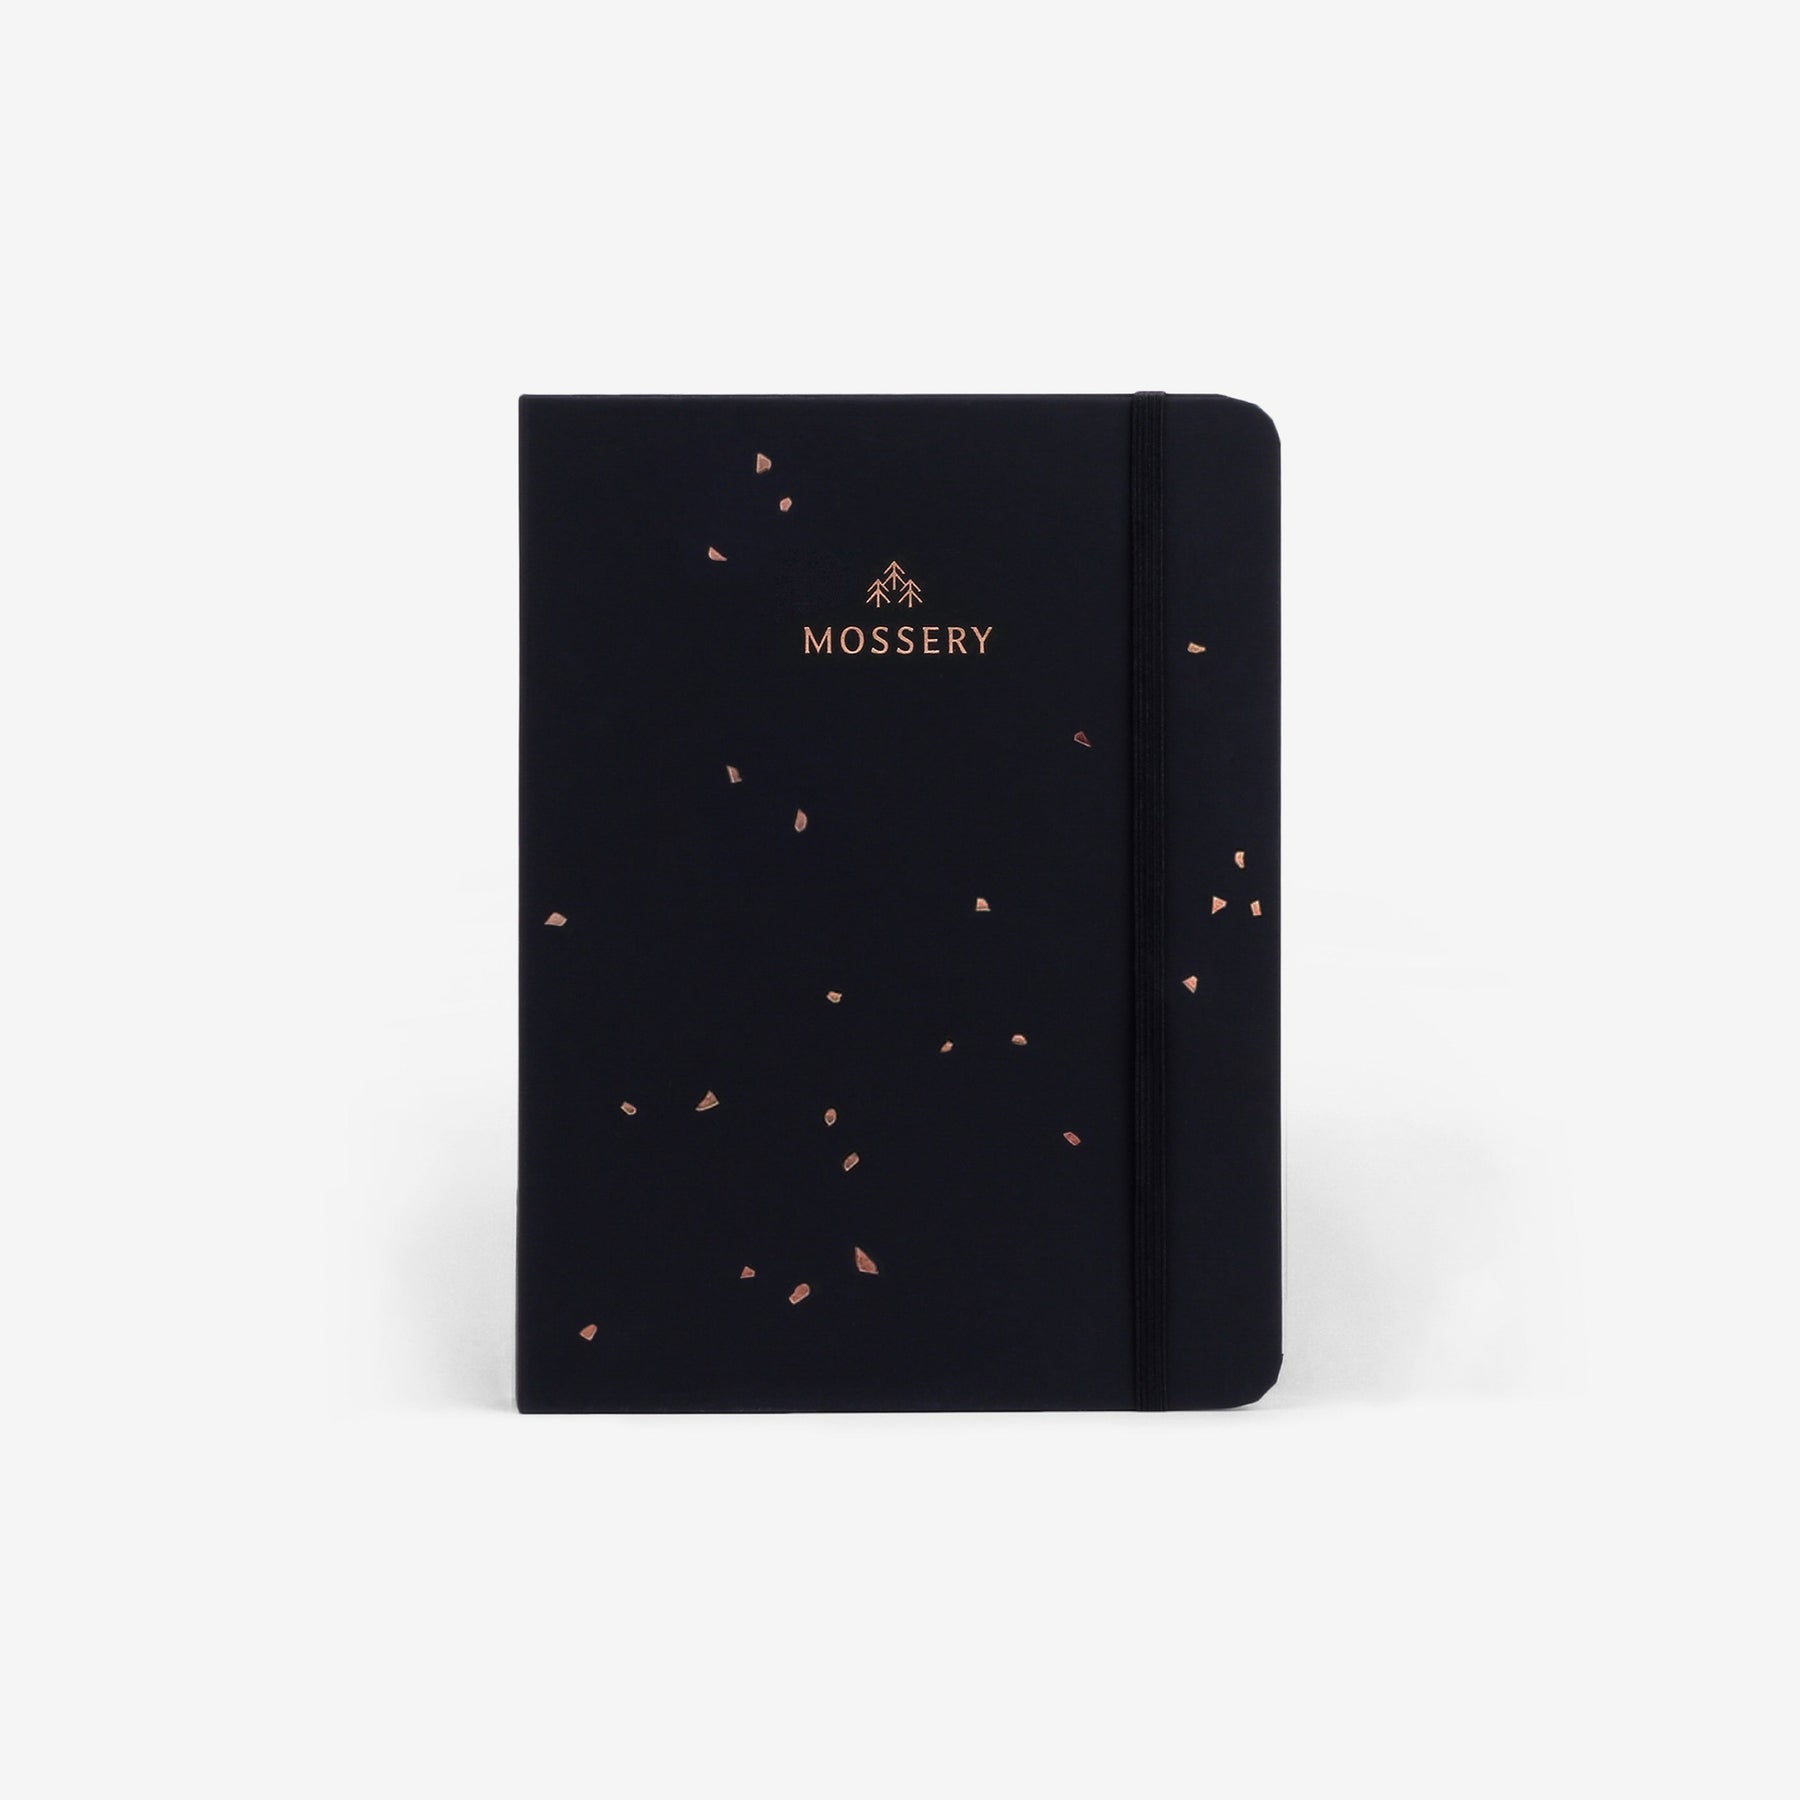 Second Chance: Black Speckle Cover (Mossery Logo)